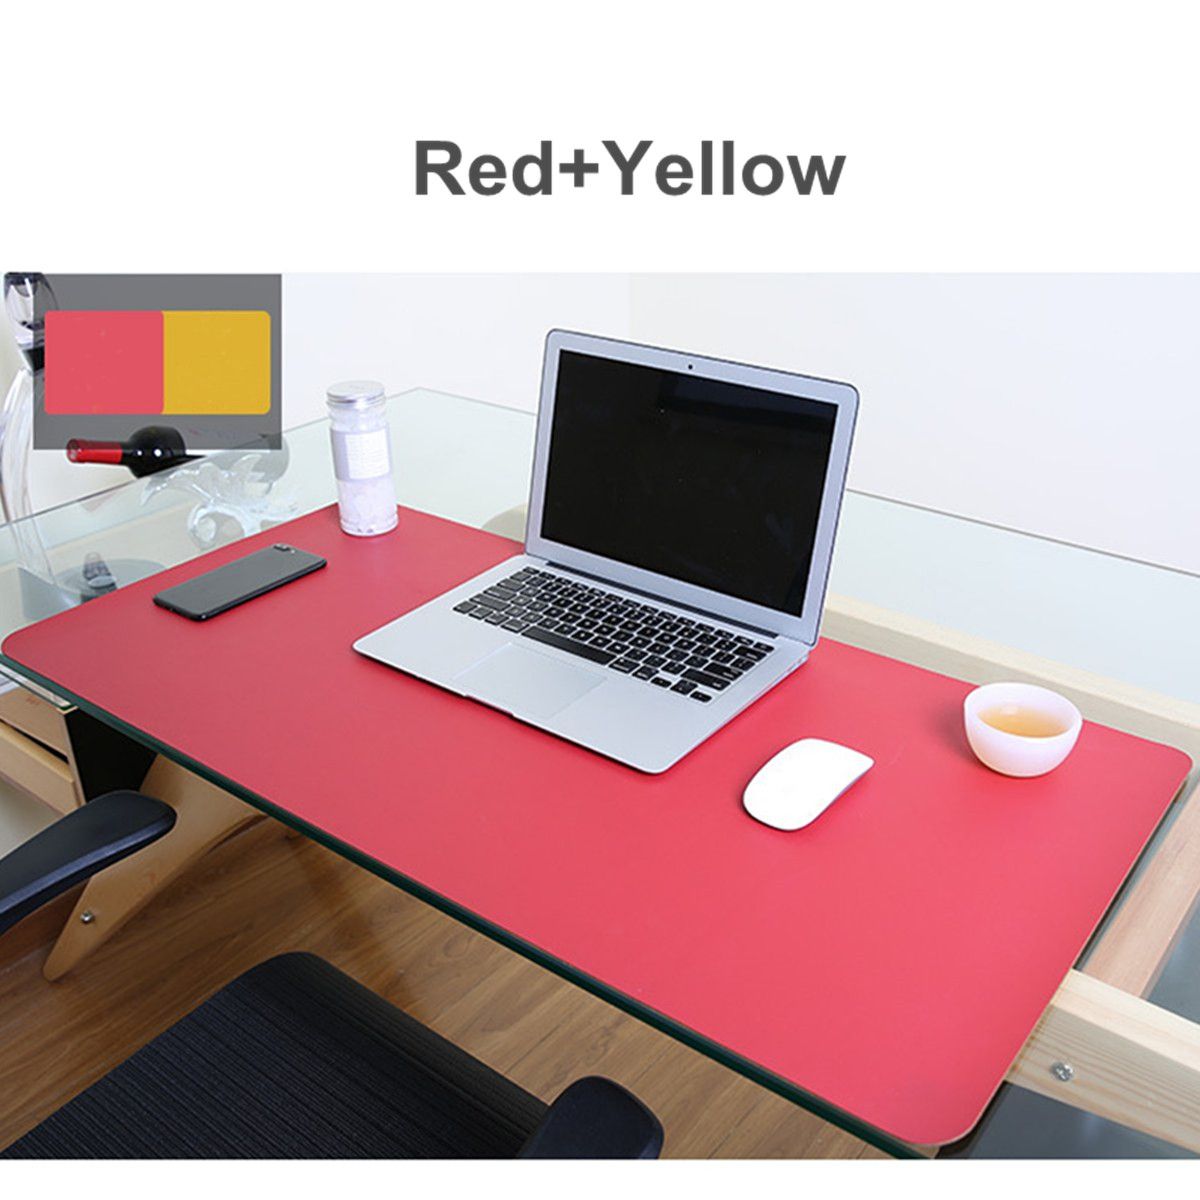 90x45cm-Both-Sides-Two-Colors-PU-leather-Mouse-Pad-Mat-Large-Office-Gaming-Desk-Mat-1273847